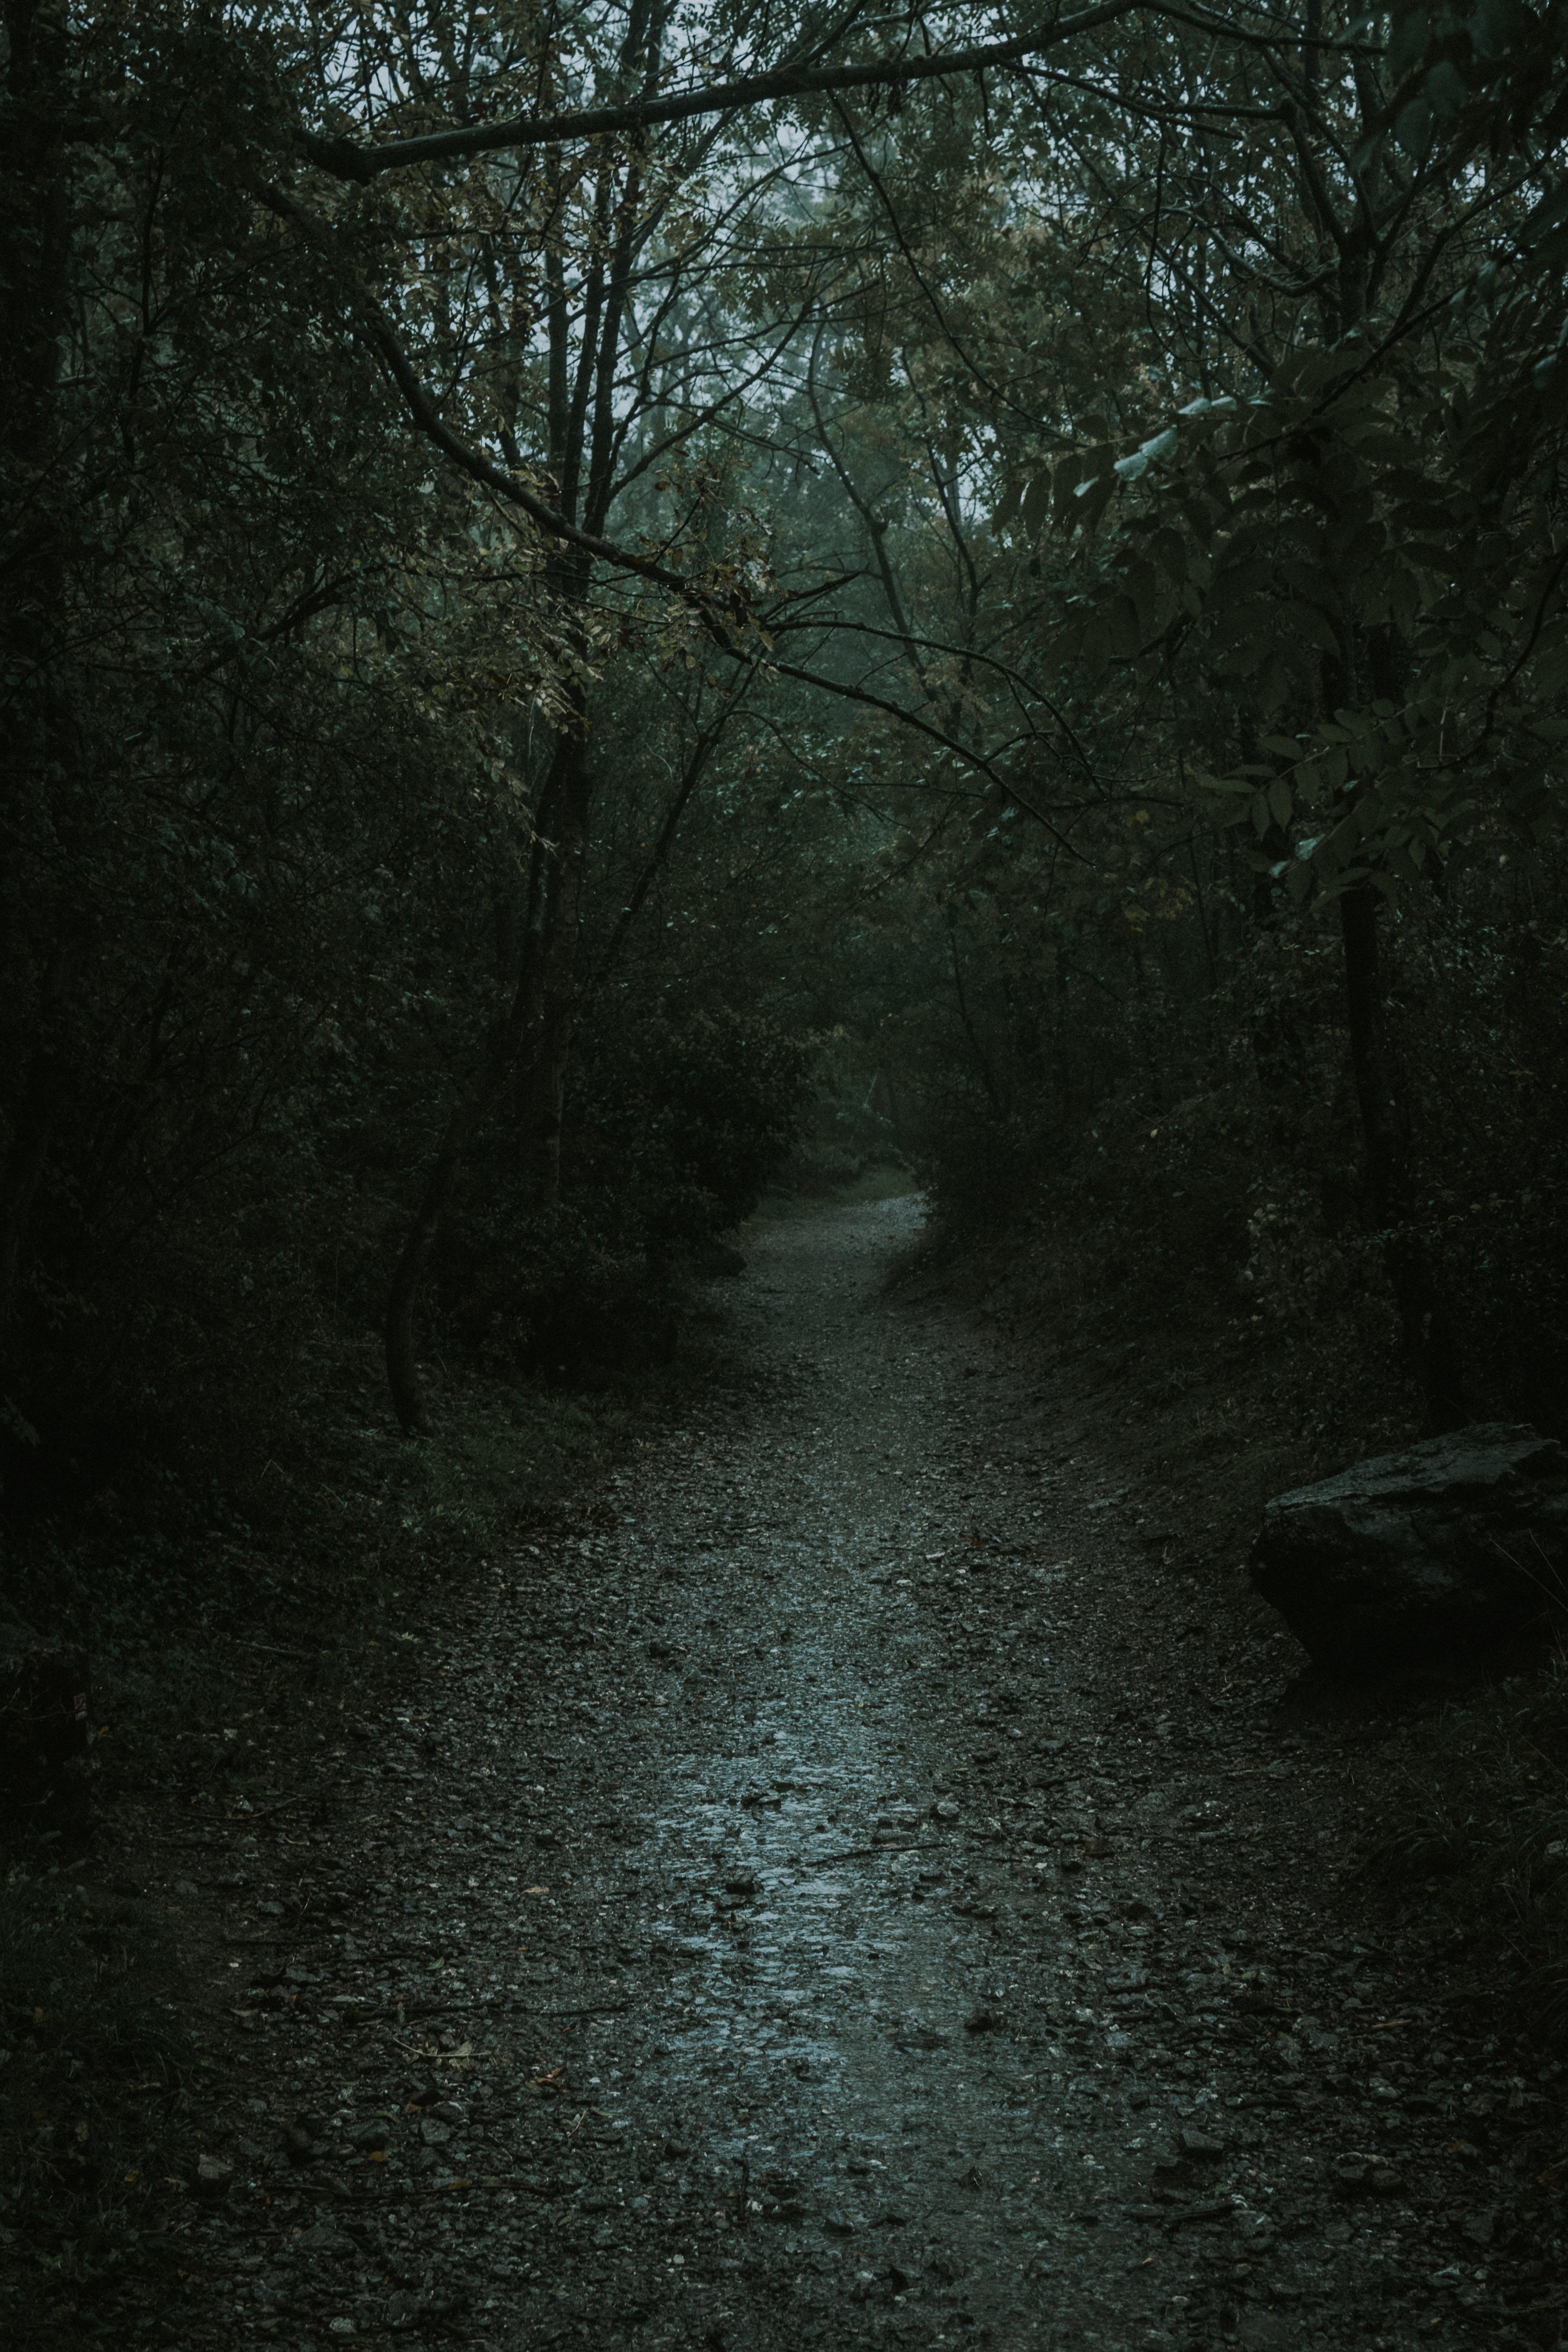 path, dark, nature, forest, gloomy High Definition image